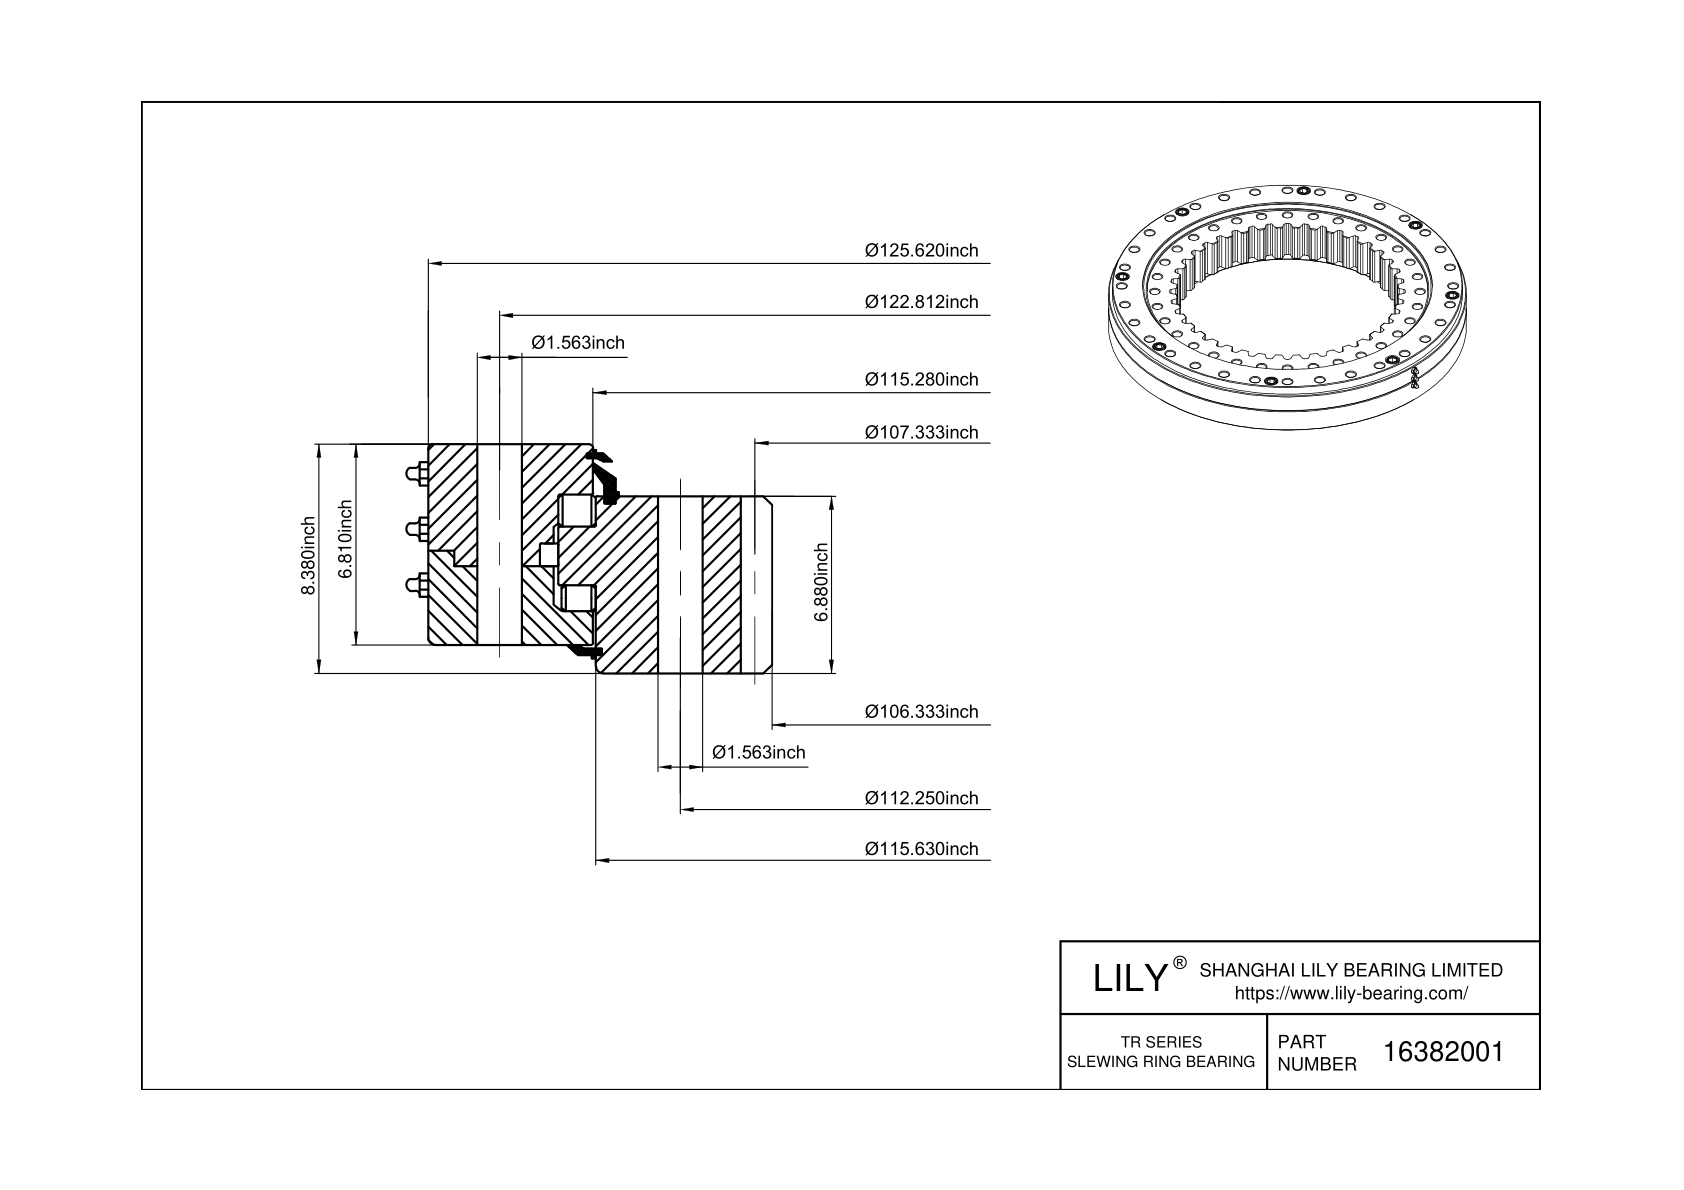 16382001 TR Series cad drawing